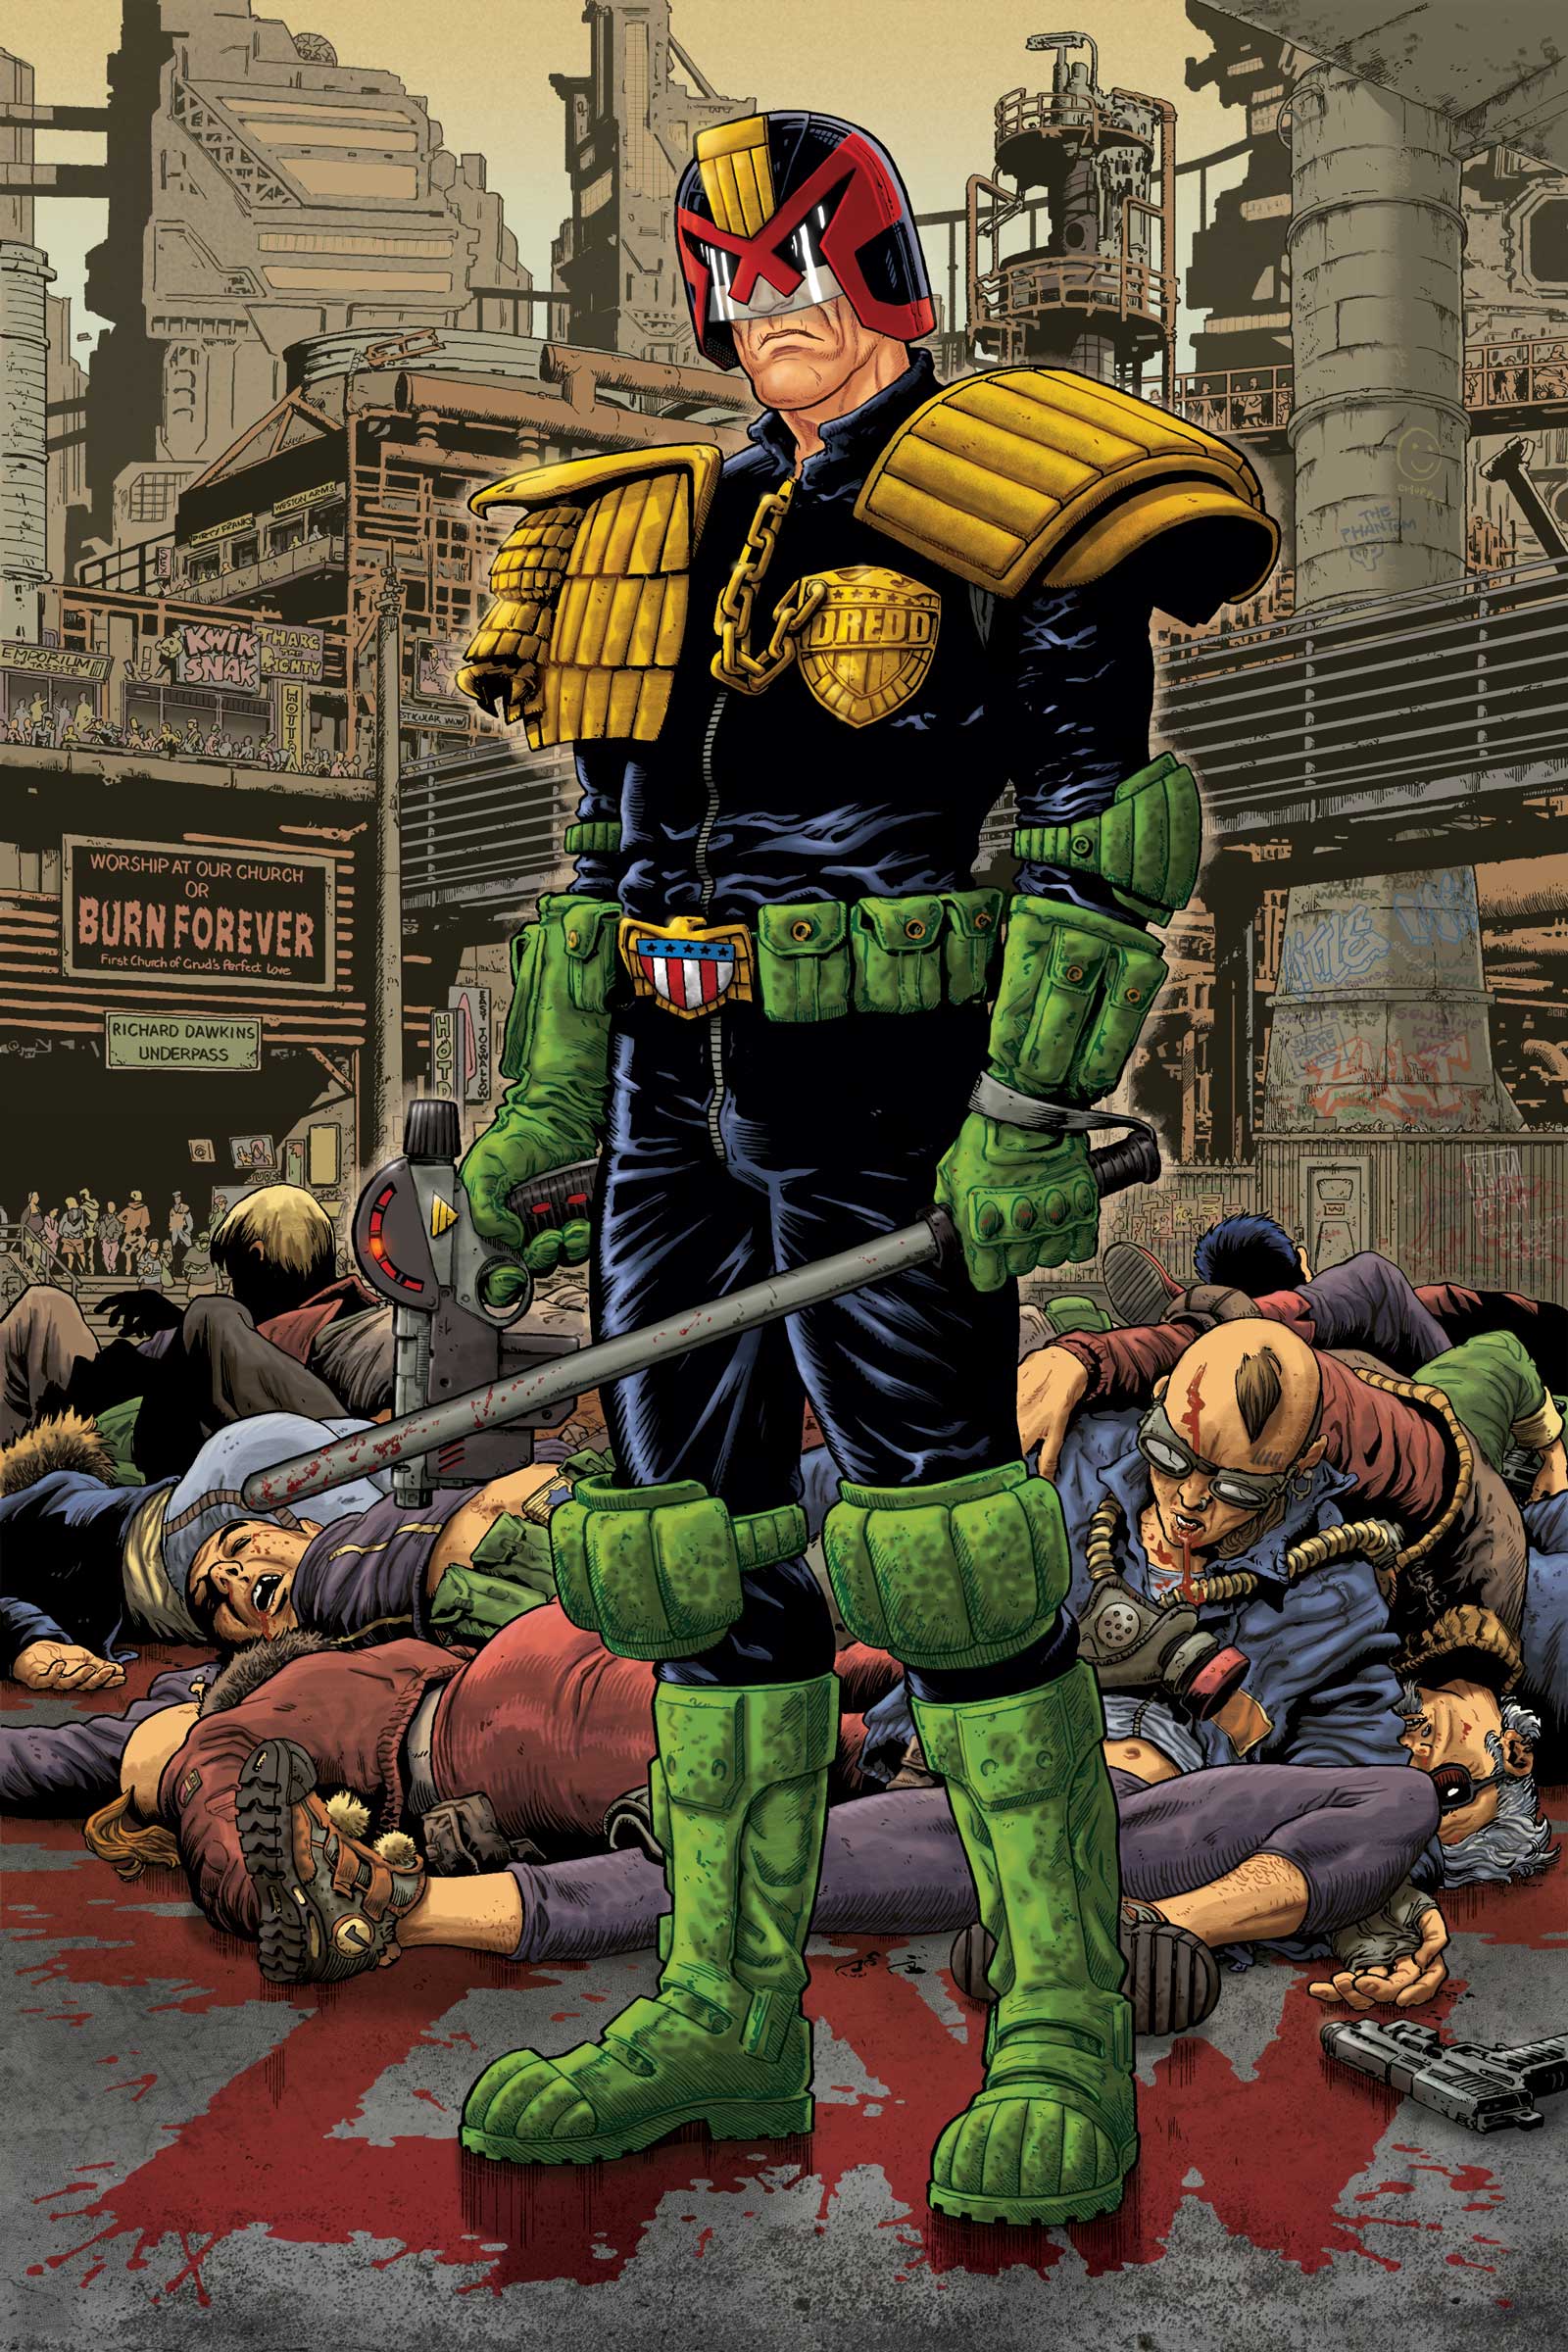 A cover for IDW's Judge Dredd comic by Mark Sexton